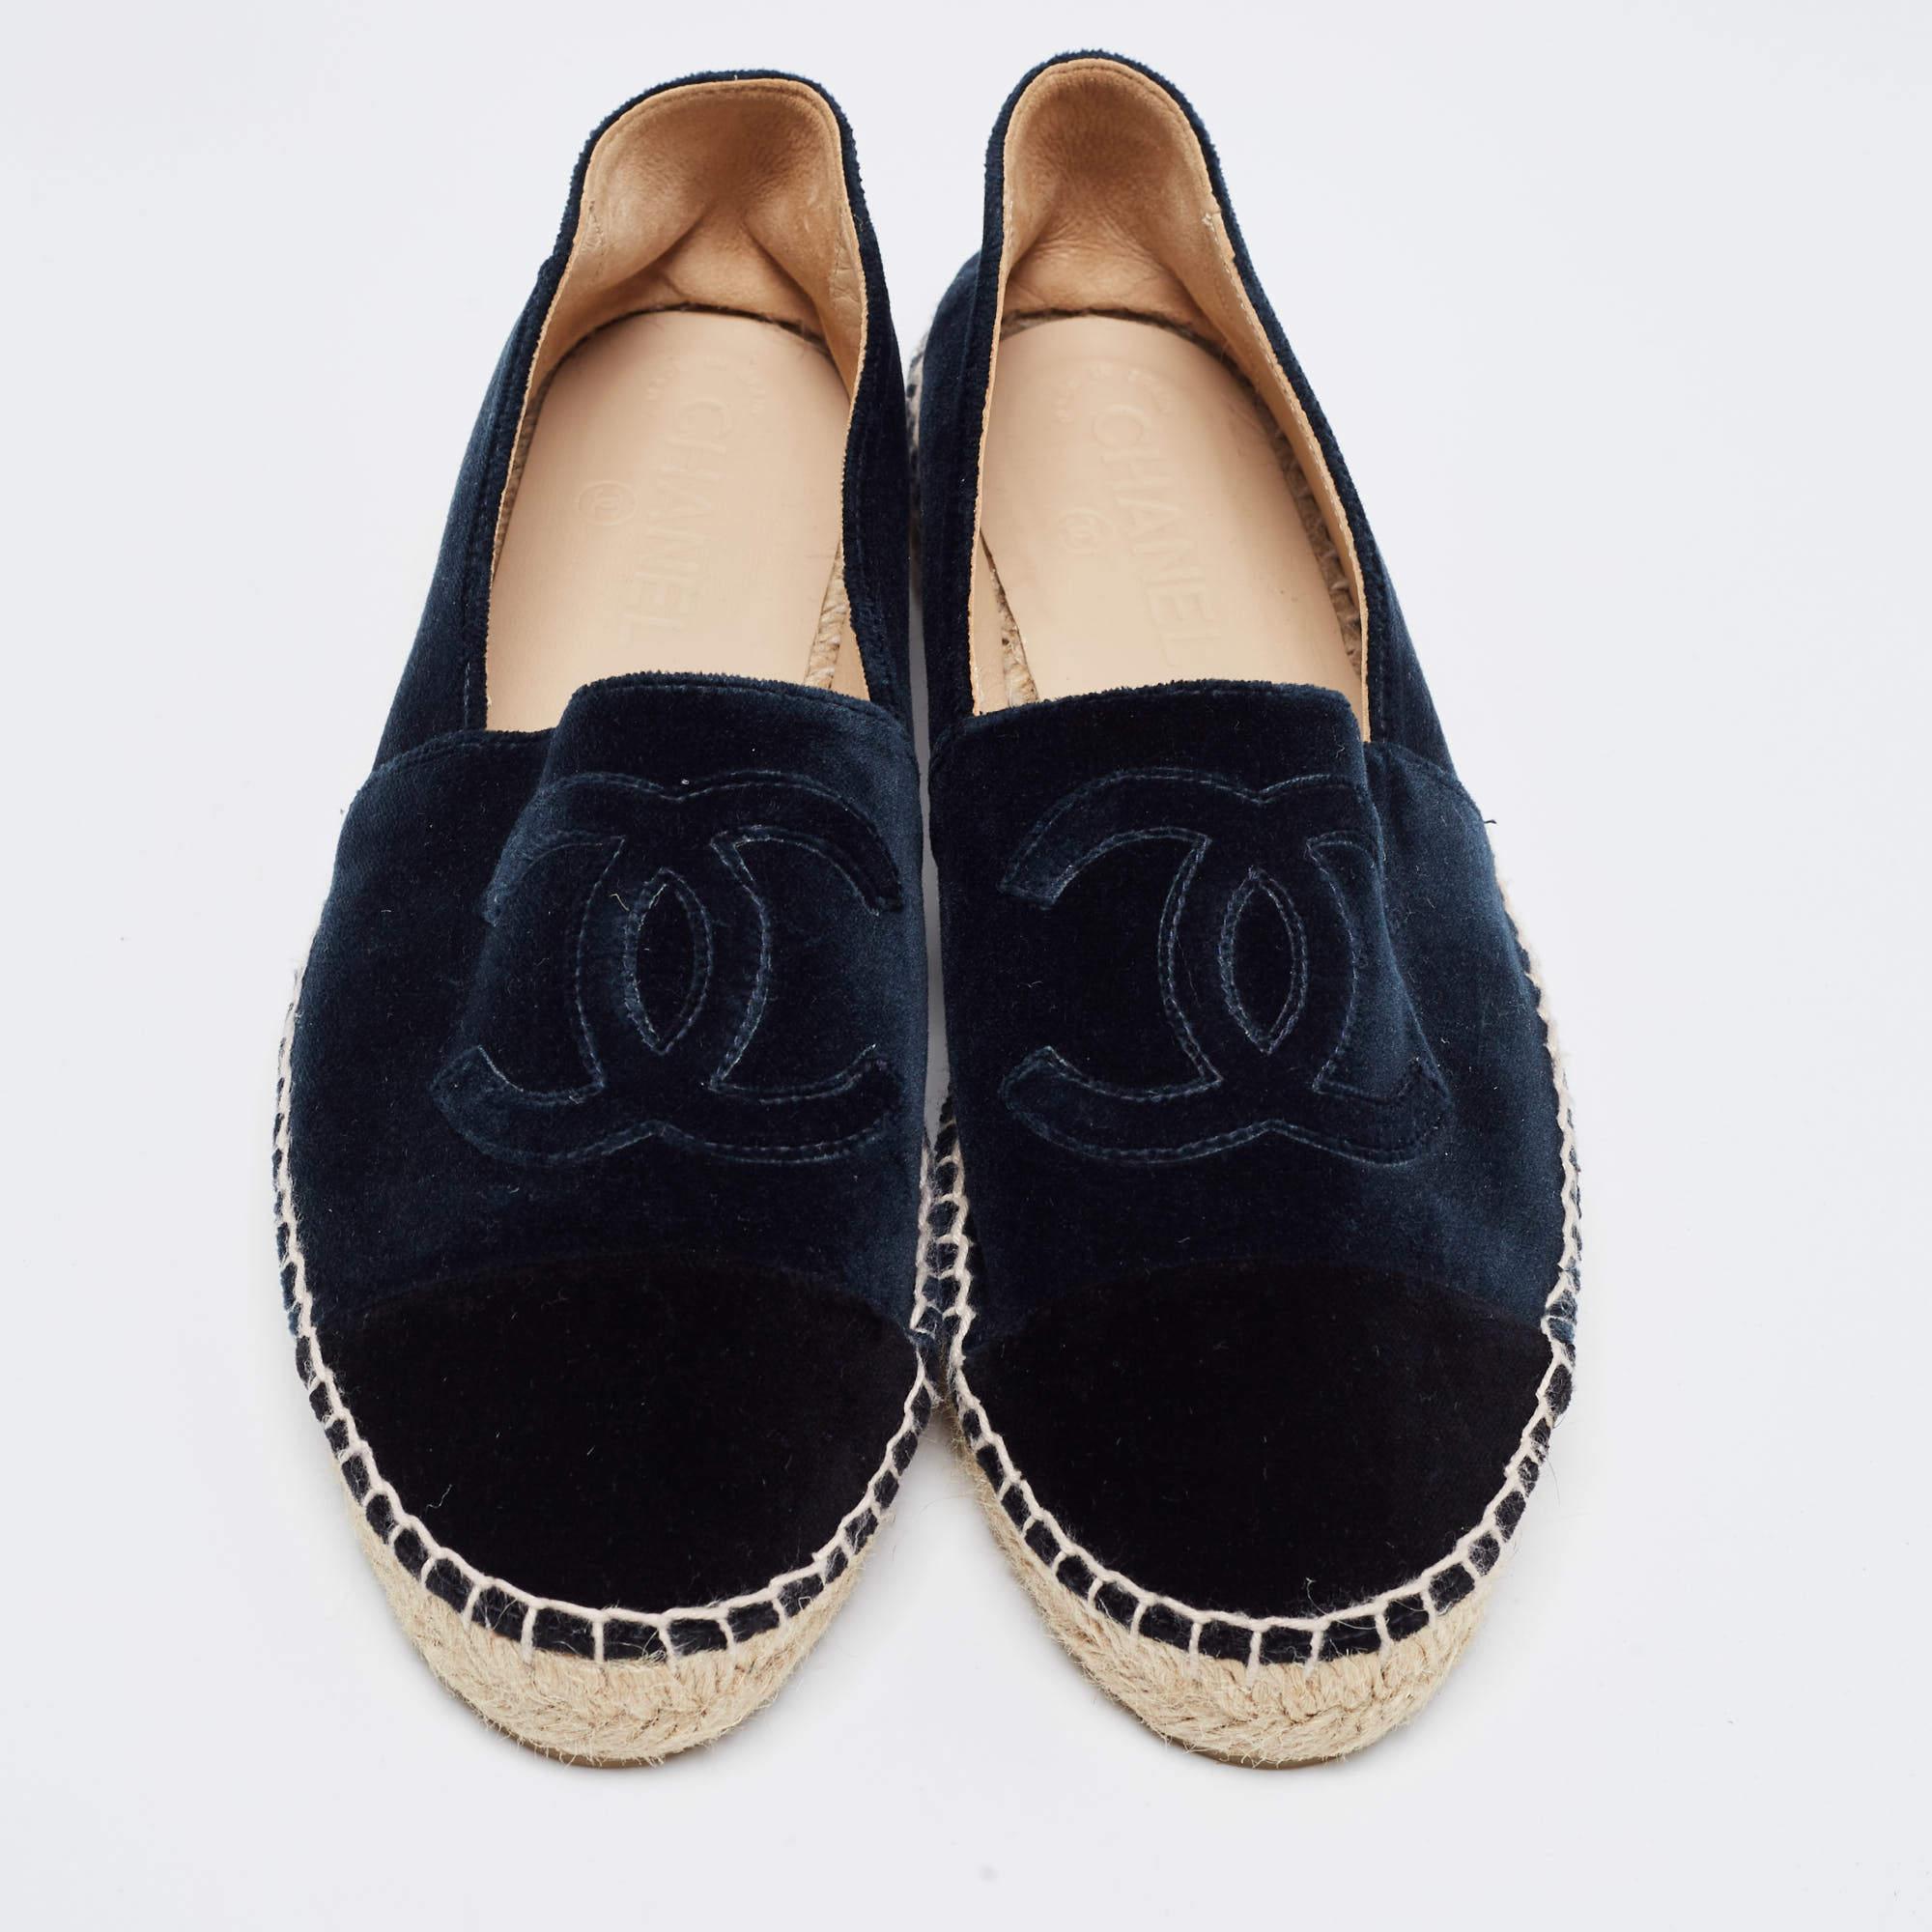 Let comfort and classic style be yours with these designer espadrille flats from Chanel. Crafted with skill, the high-quality shoes have the perfect construction to take you through the day with utmost ease.

Includes: Original Dustbag

